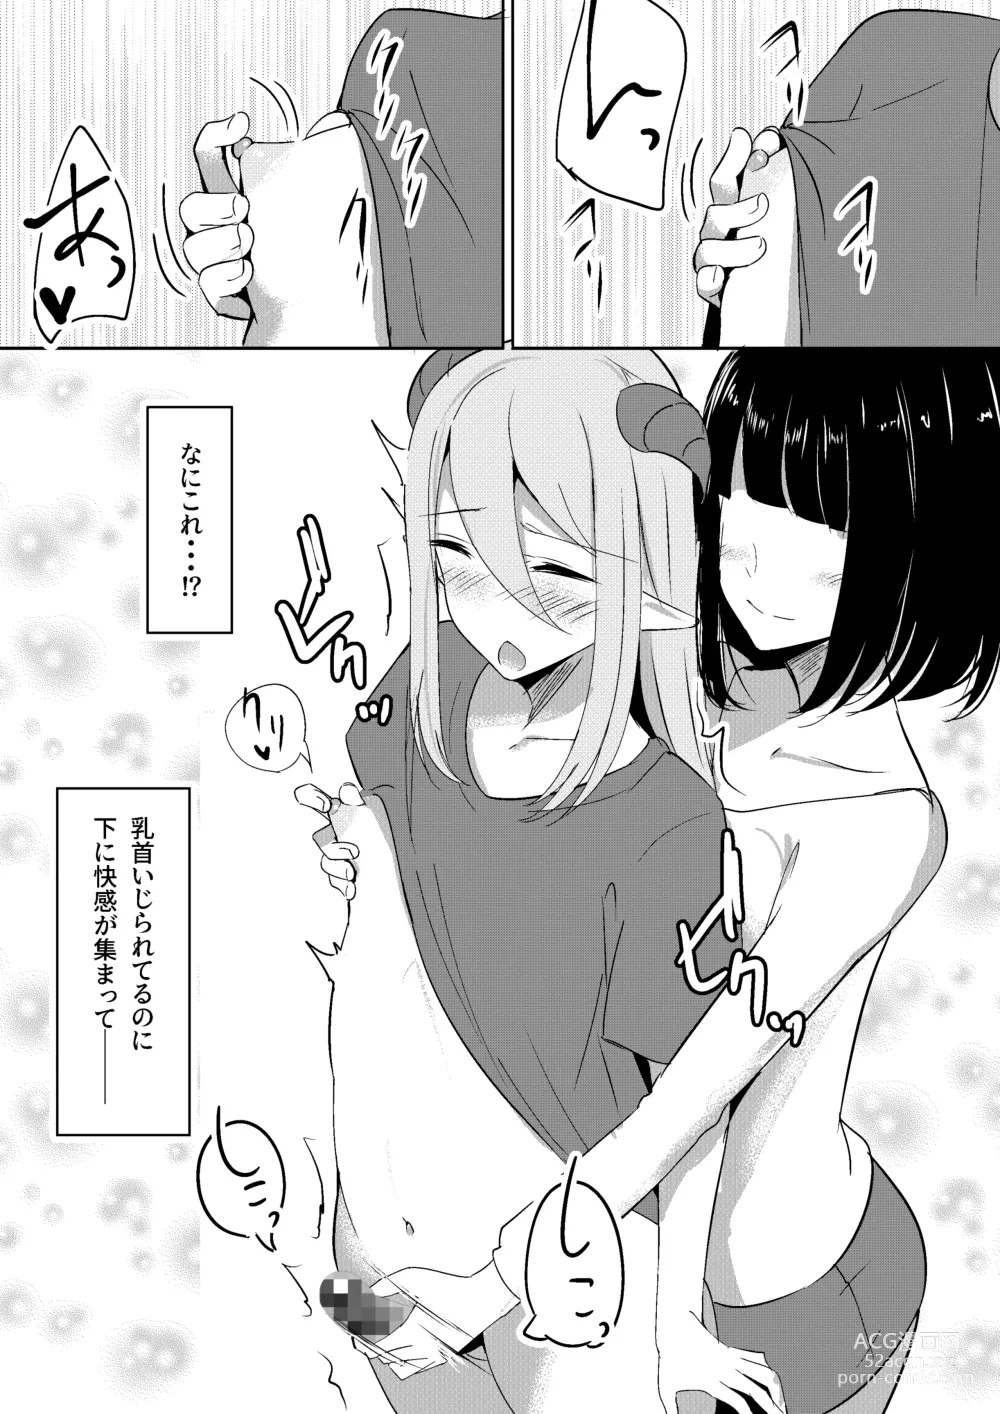 Page 12 of doujinshi Succubus Lily 2